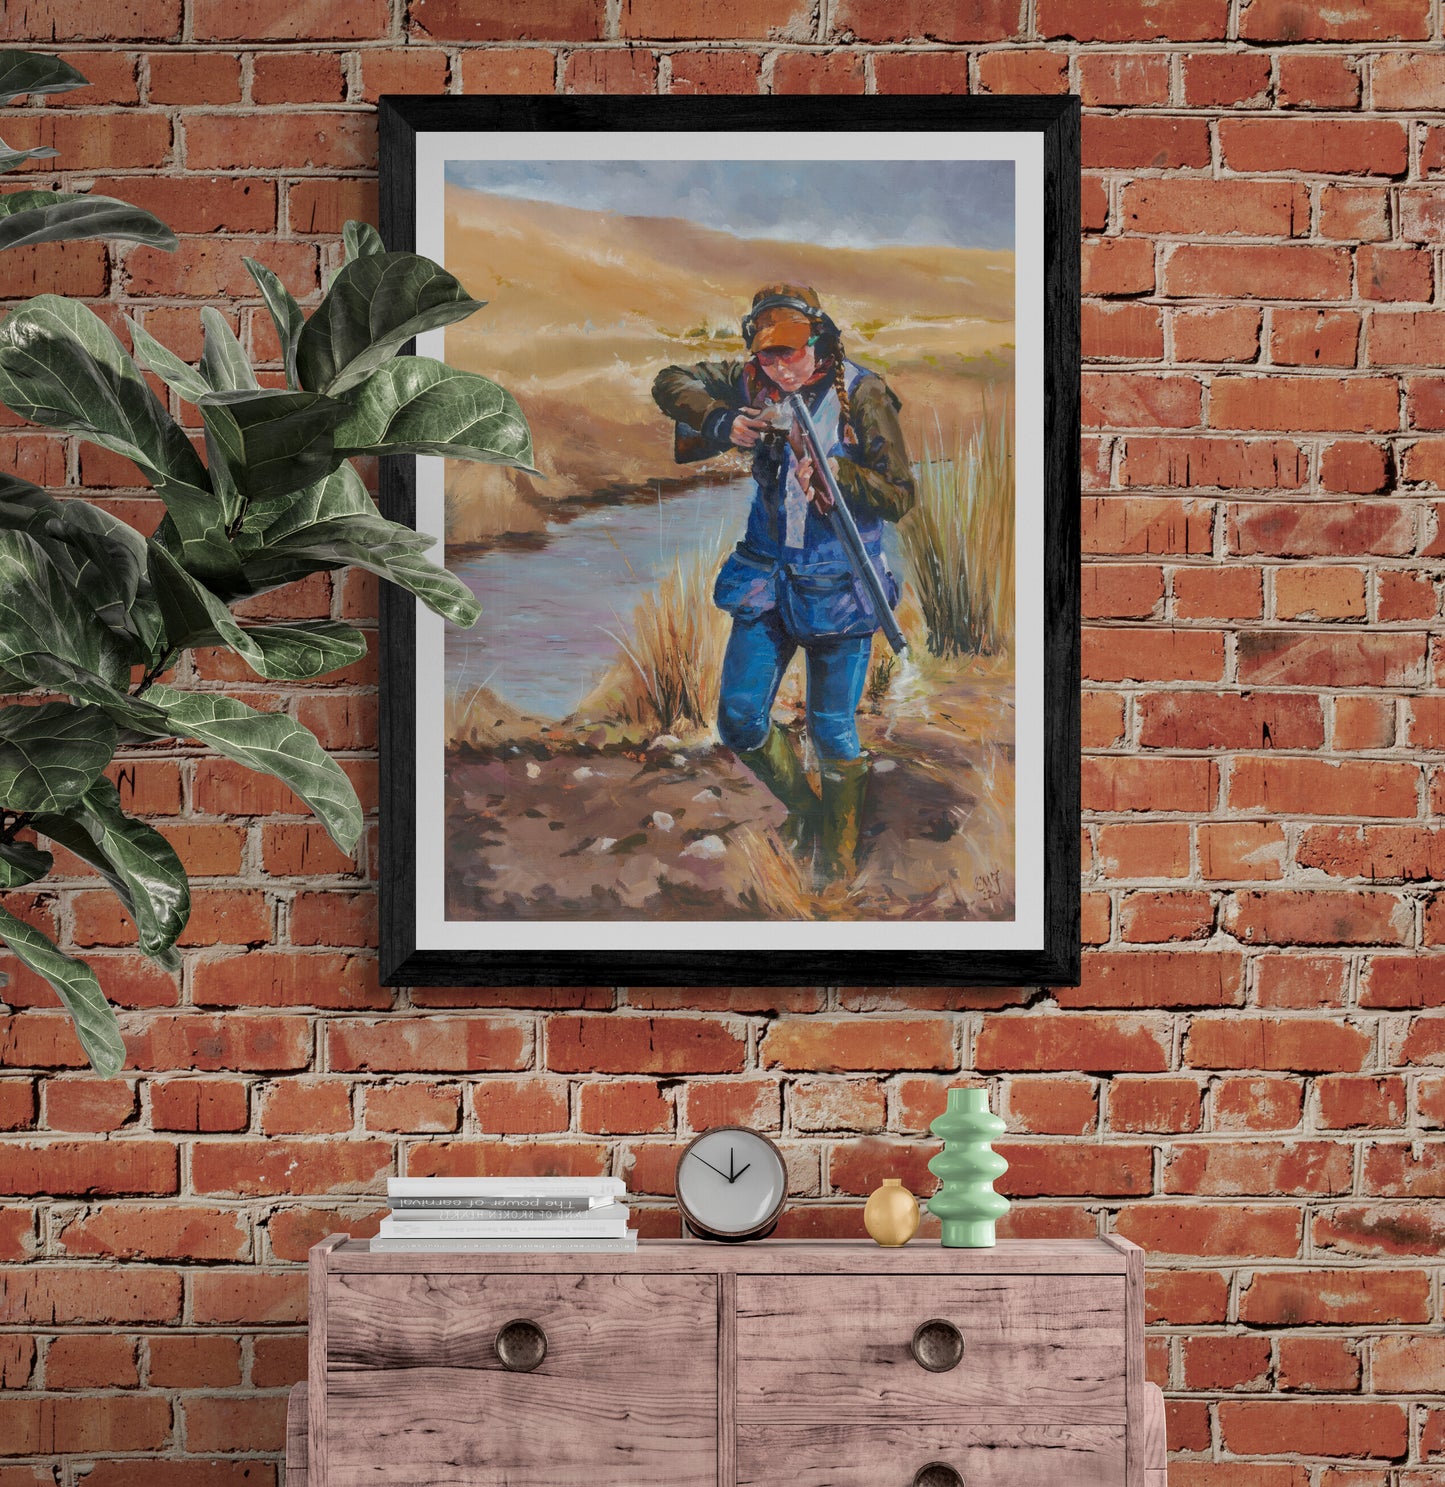 Girl power - clay pigeon shooting for girls - fine art print displayed in black frame on brick wall